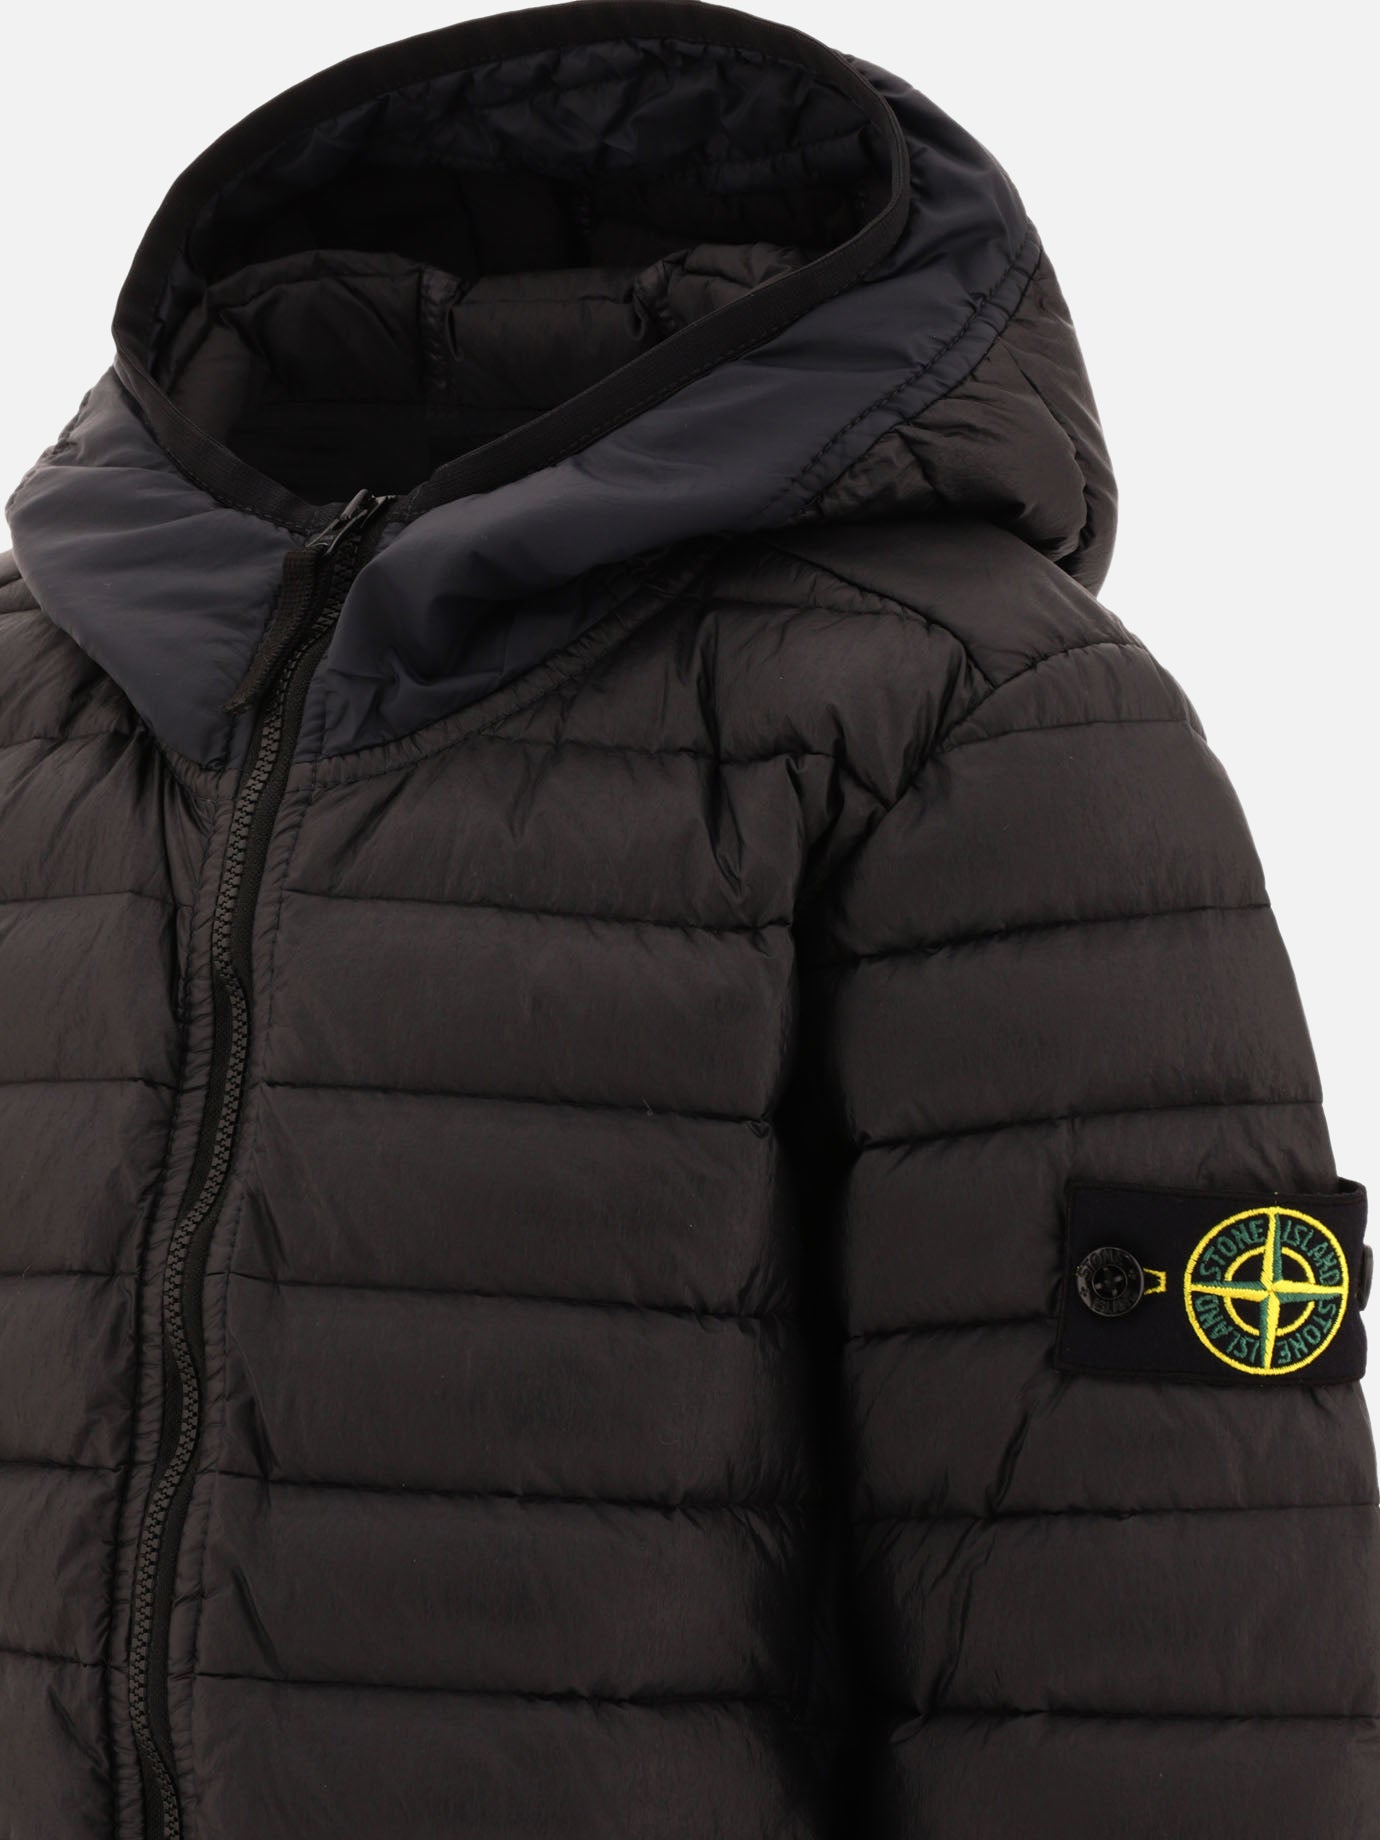 "Compass" down jacket